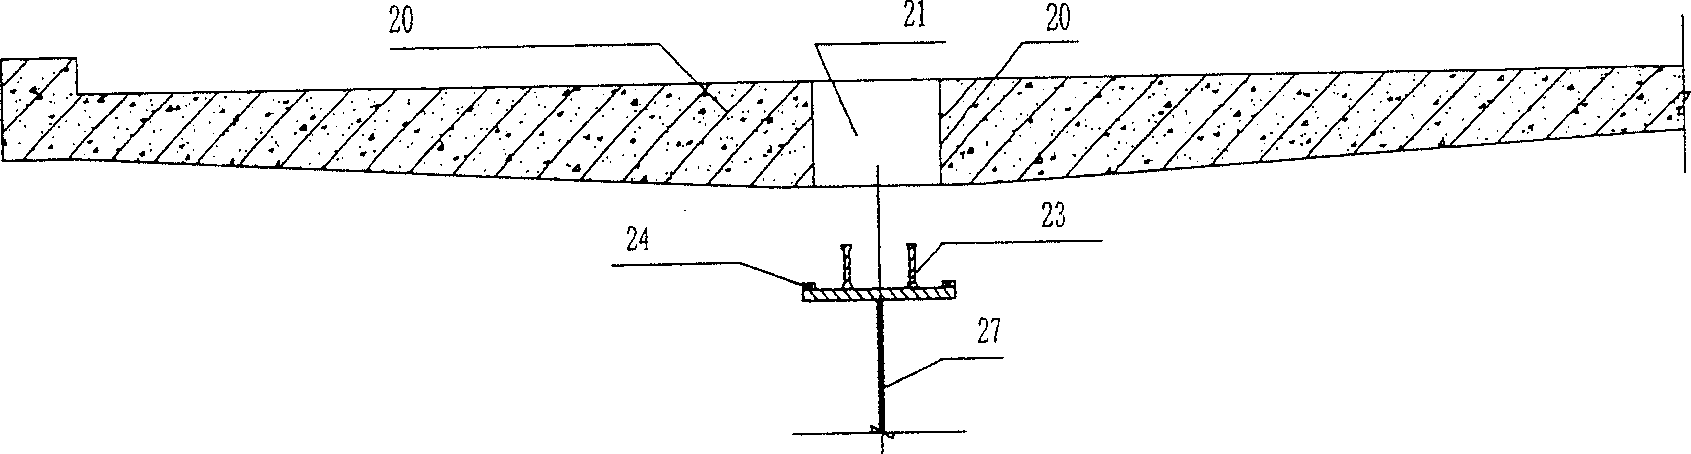 Superposition beam structure for prefabricated bridge surface plate and steel beam close combination